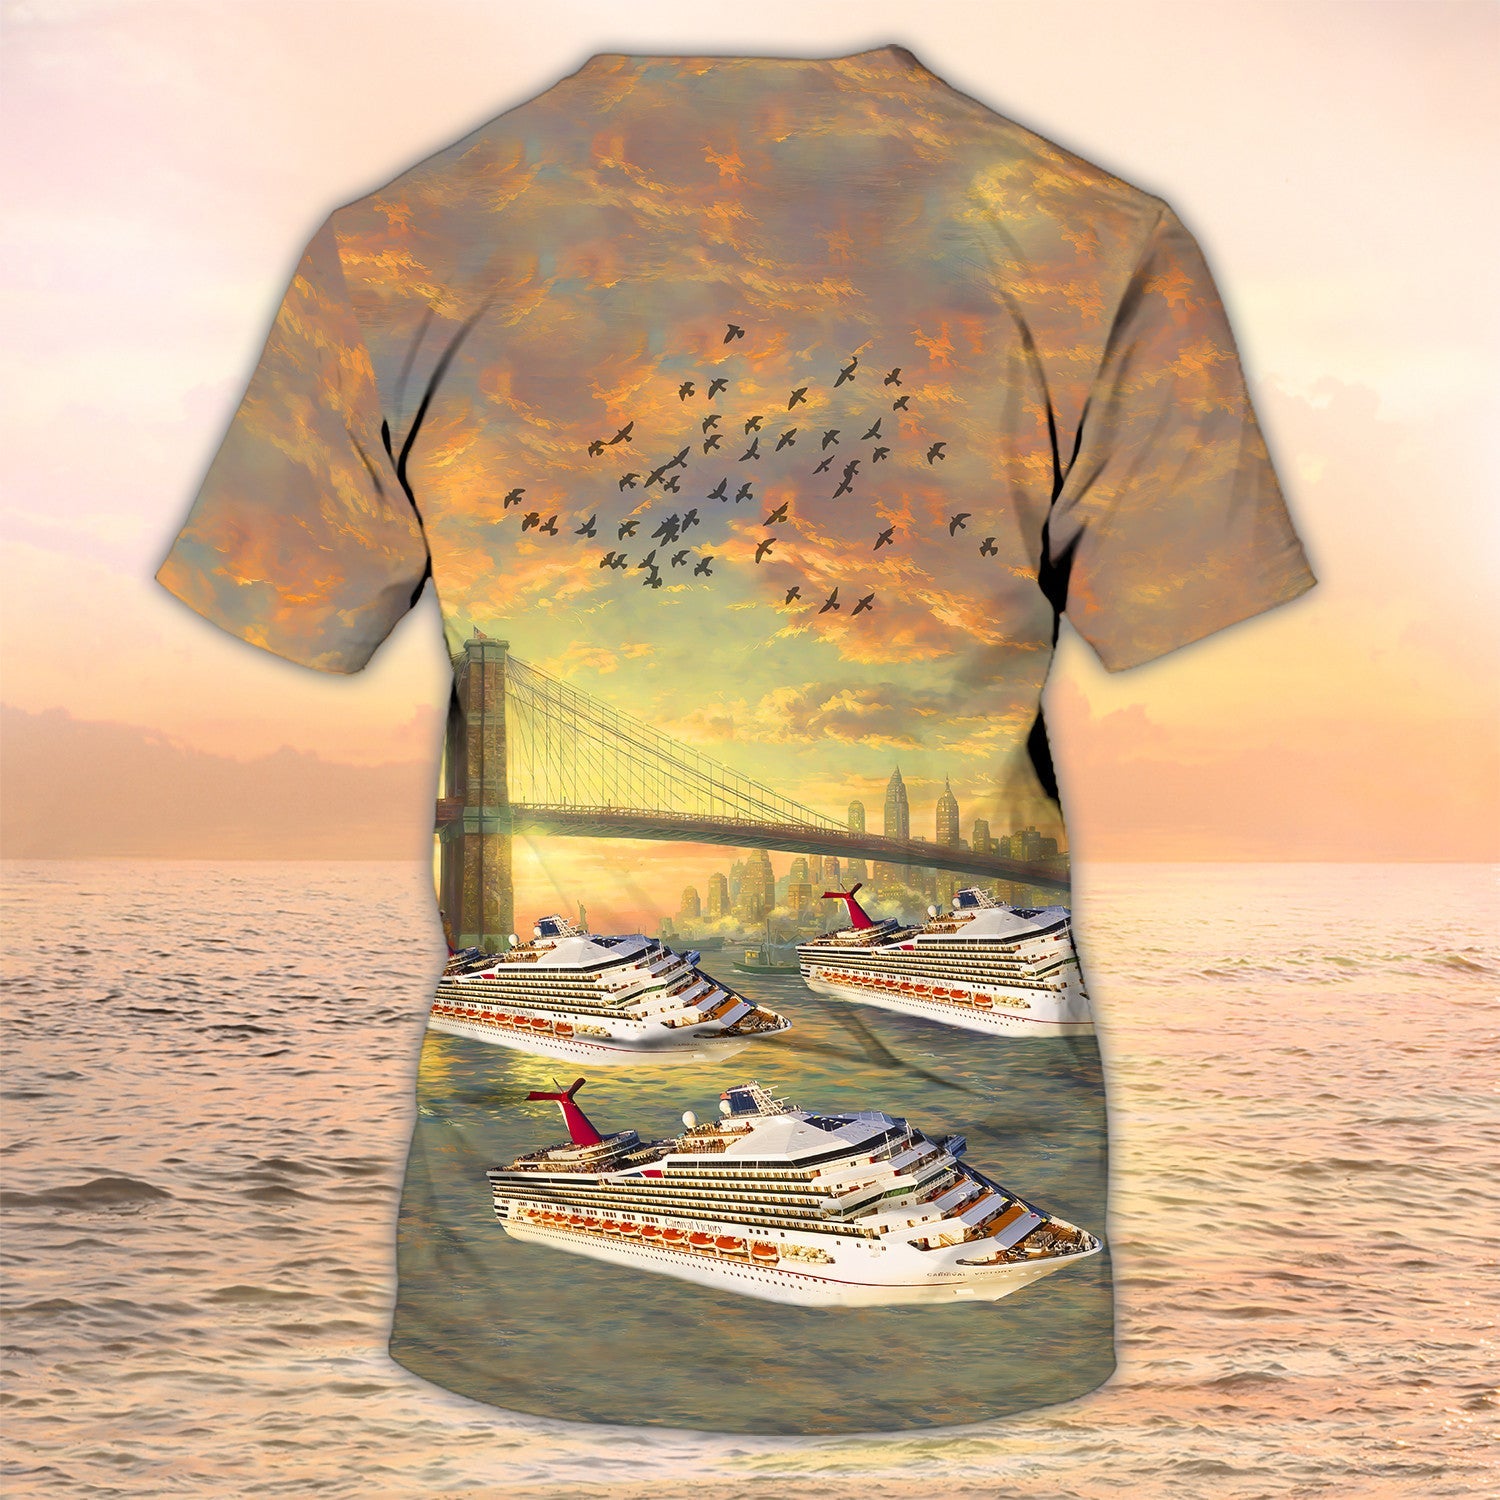 Personalized 3D All Over Printed Cruise Tshirts/ Cruise T Shirt Designs/ Cruise Lover Gift